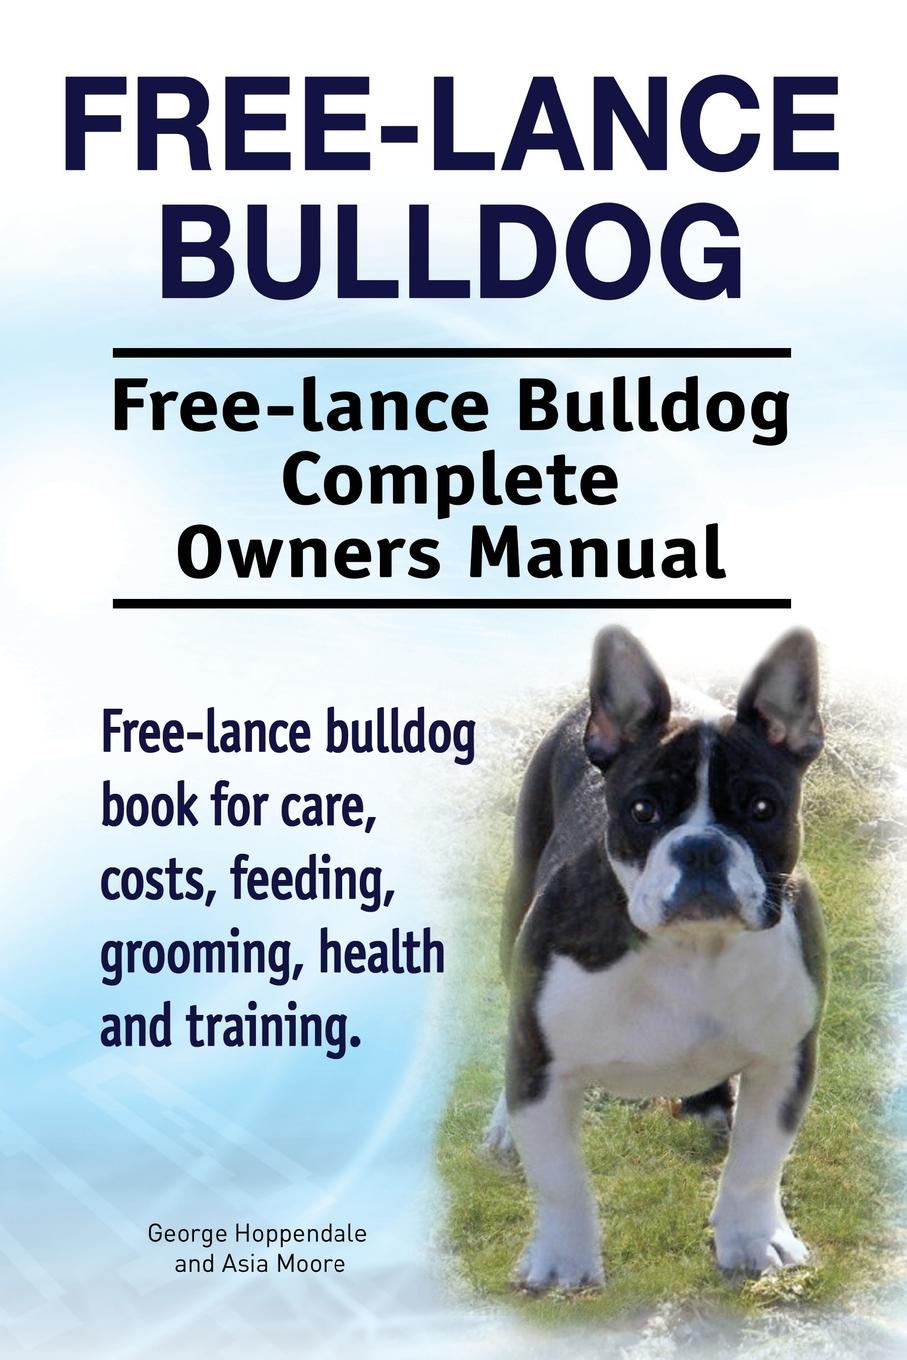 Free lance bulldog. Free lance bulldog Complete Owners Manual. Free lance bulldog book for care, costs, feeding, grooming, health and training.